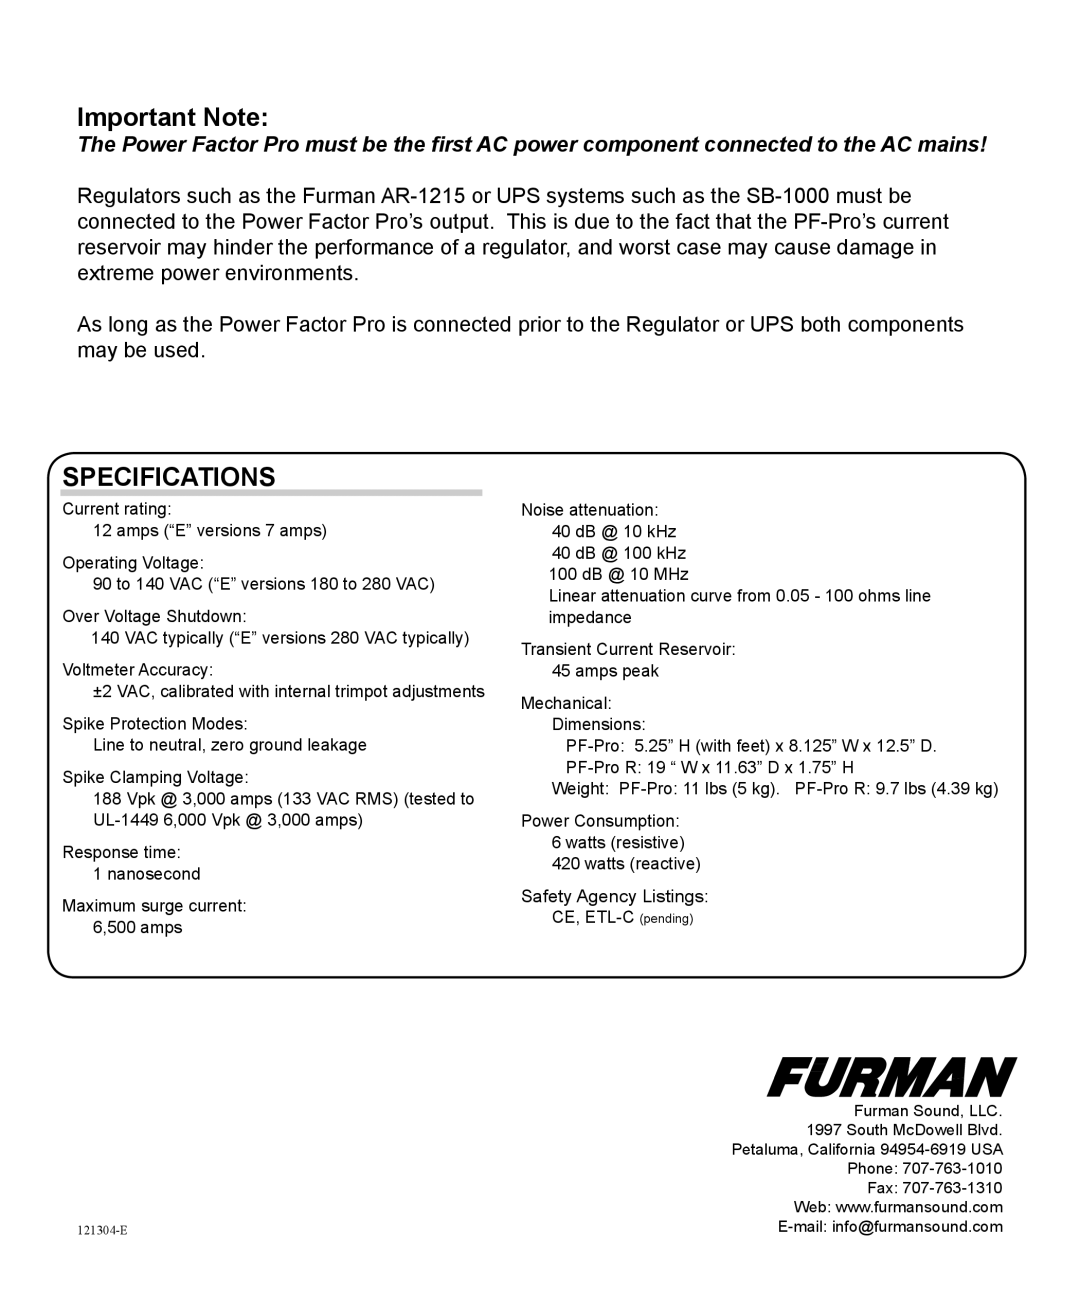 Furman Sound PF-Pro, PF-Pro R Power Factor pro manual, Important Note, Specifications 